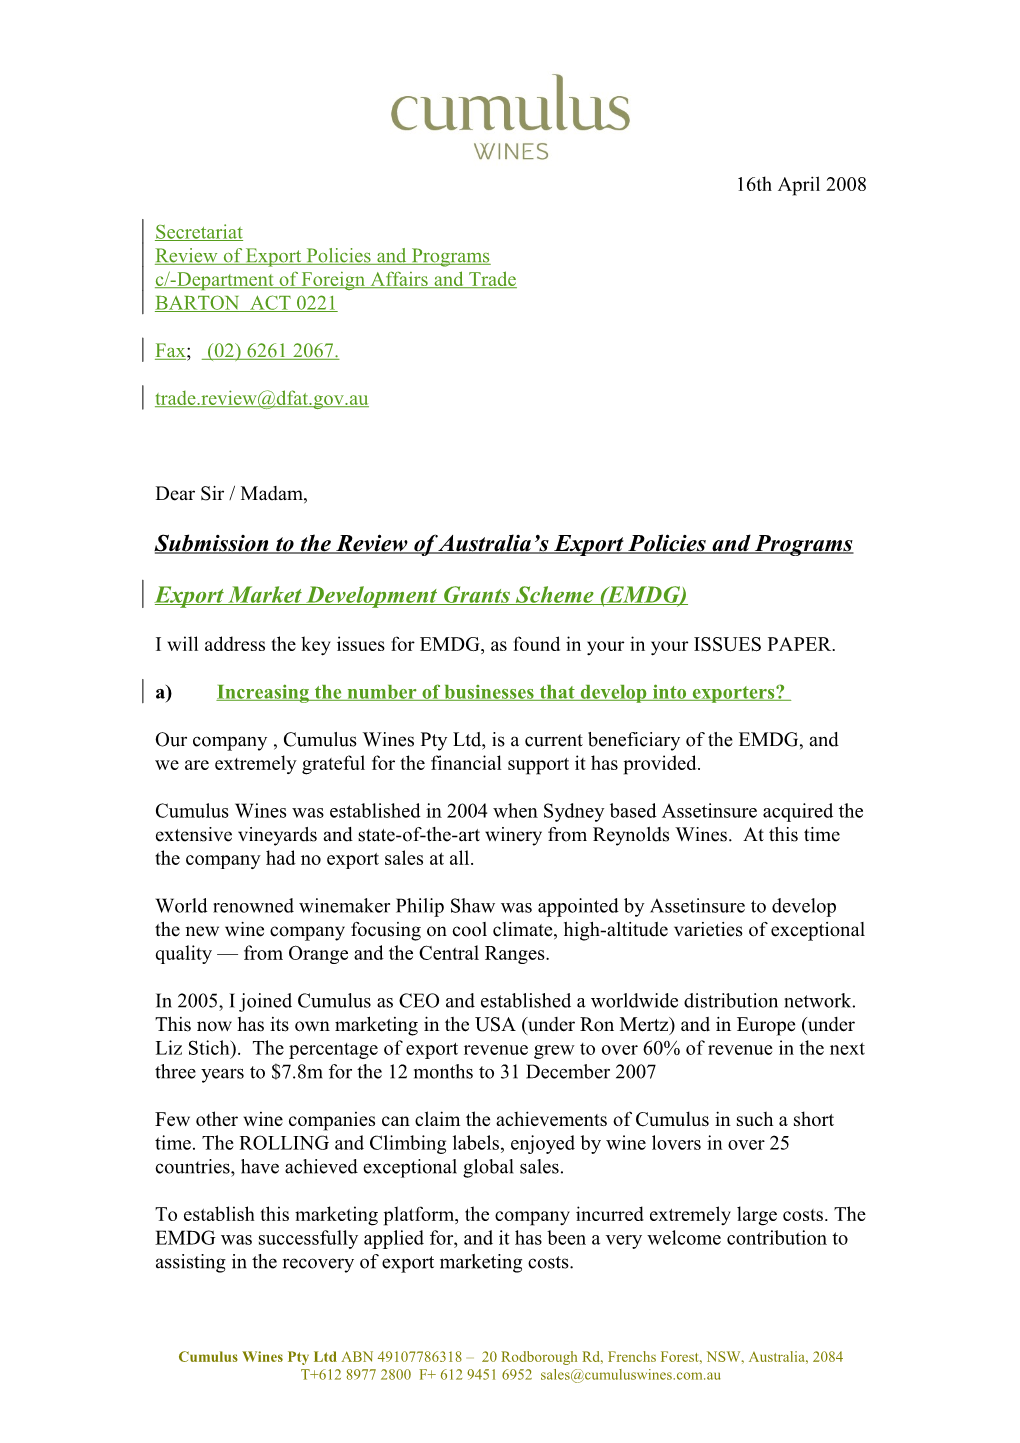 Submission to the Review of Australia S Export Policies and Programs